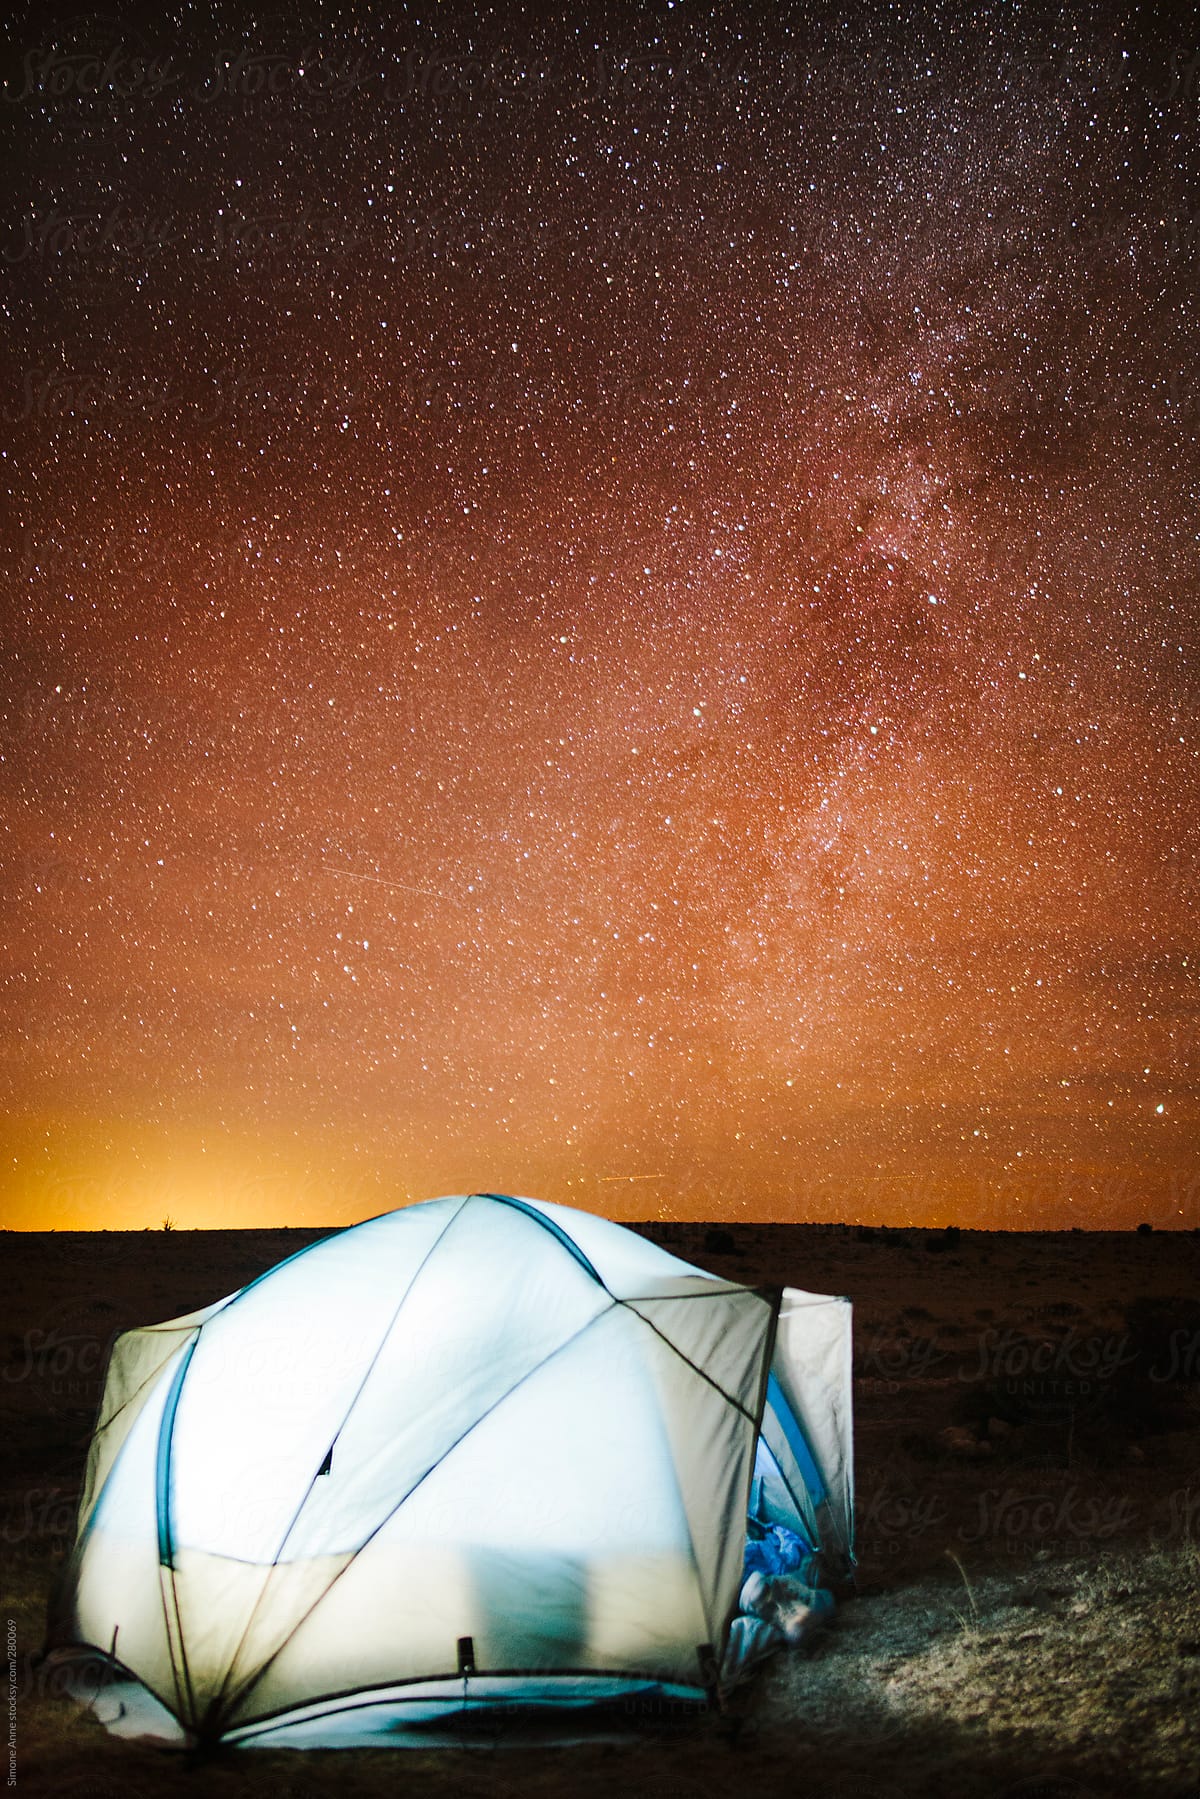 Illuminated tent with starry sky backdrop